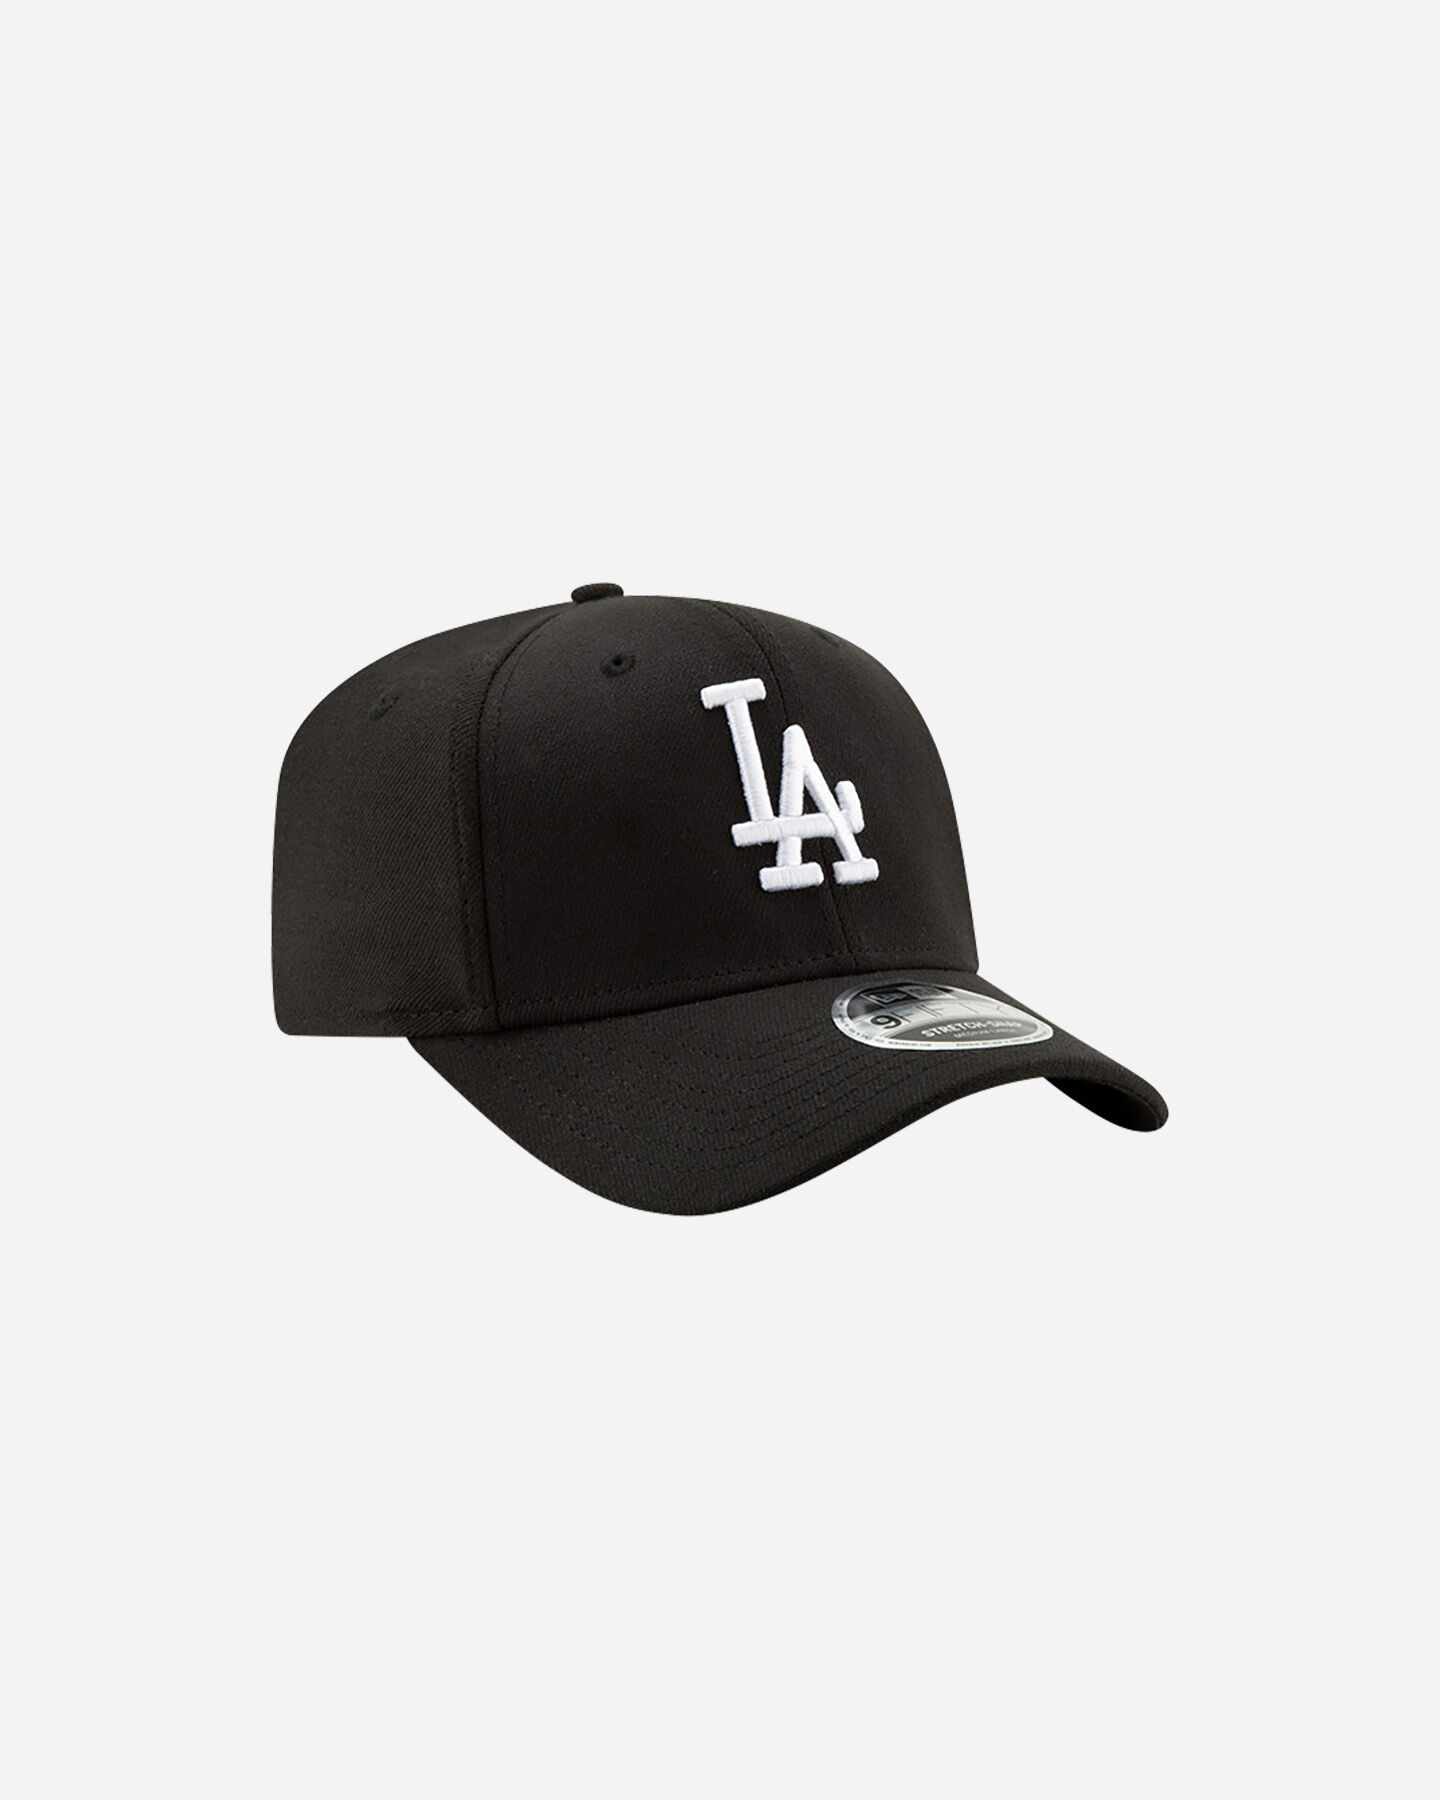  Cappellino NEW ERA 9FIFTY MLB STRETCHSNAP LOS ANGELES DODGERS  S5100641|001|SM scatto 0